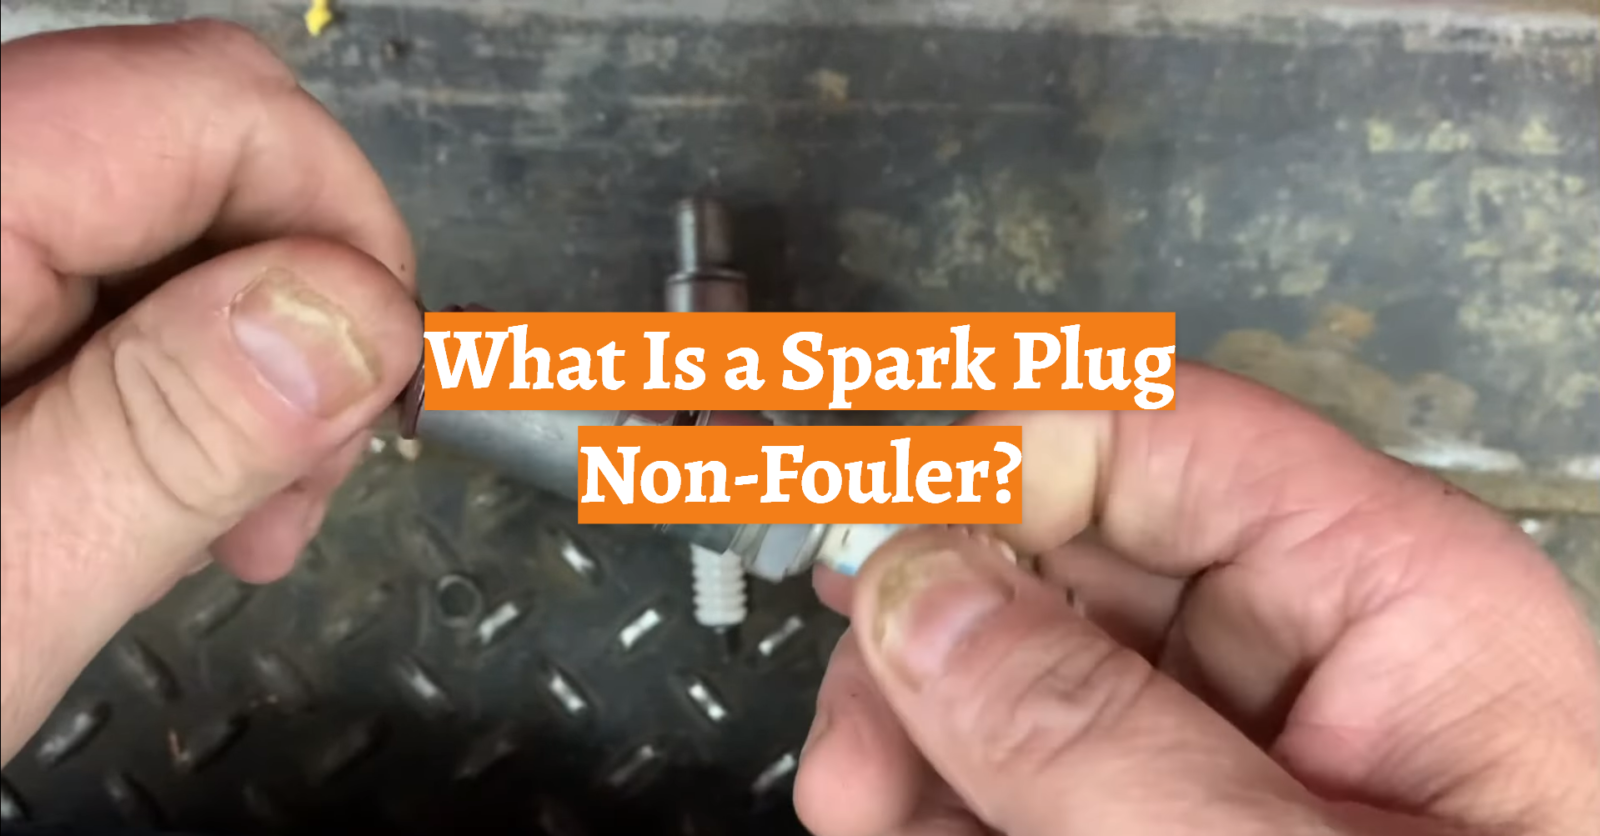 What Is a Spark Plug Non-Fouler?